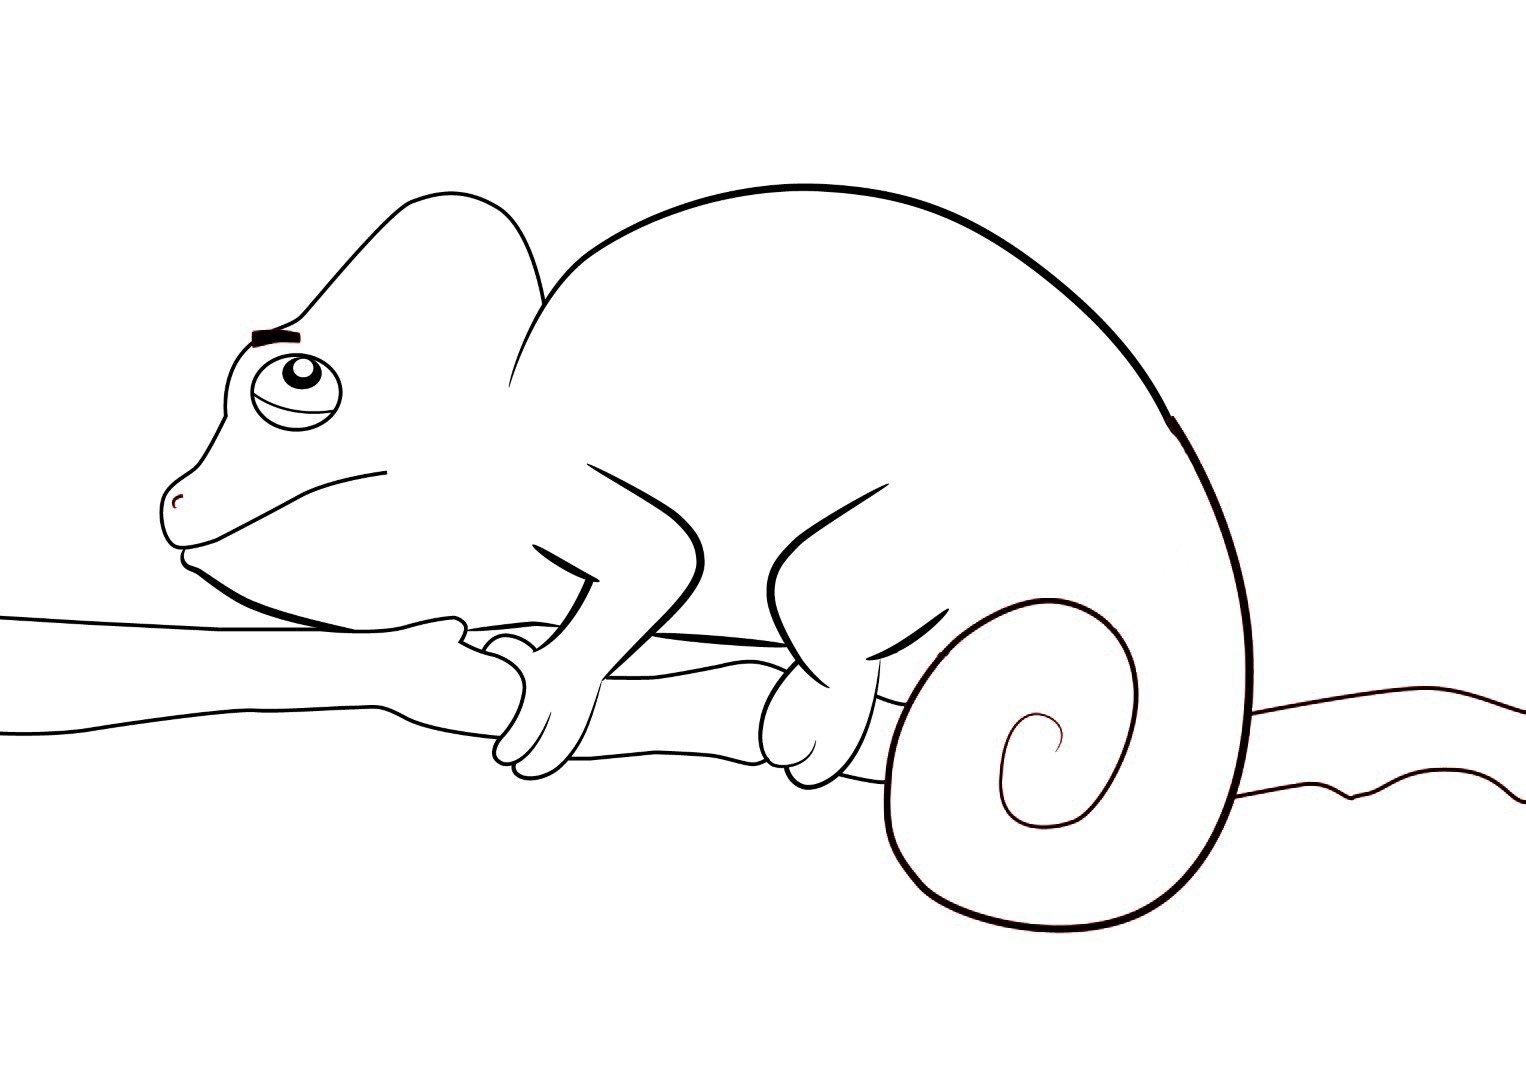 Chameleon coloring #14, Download drawings